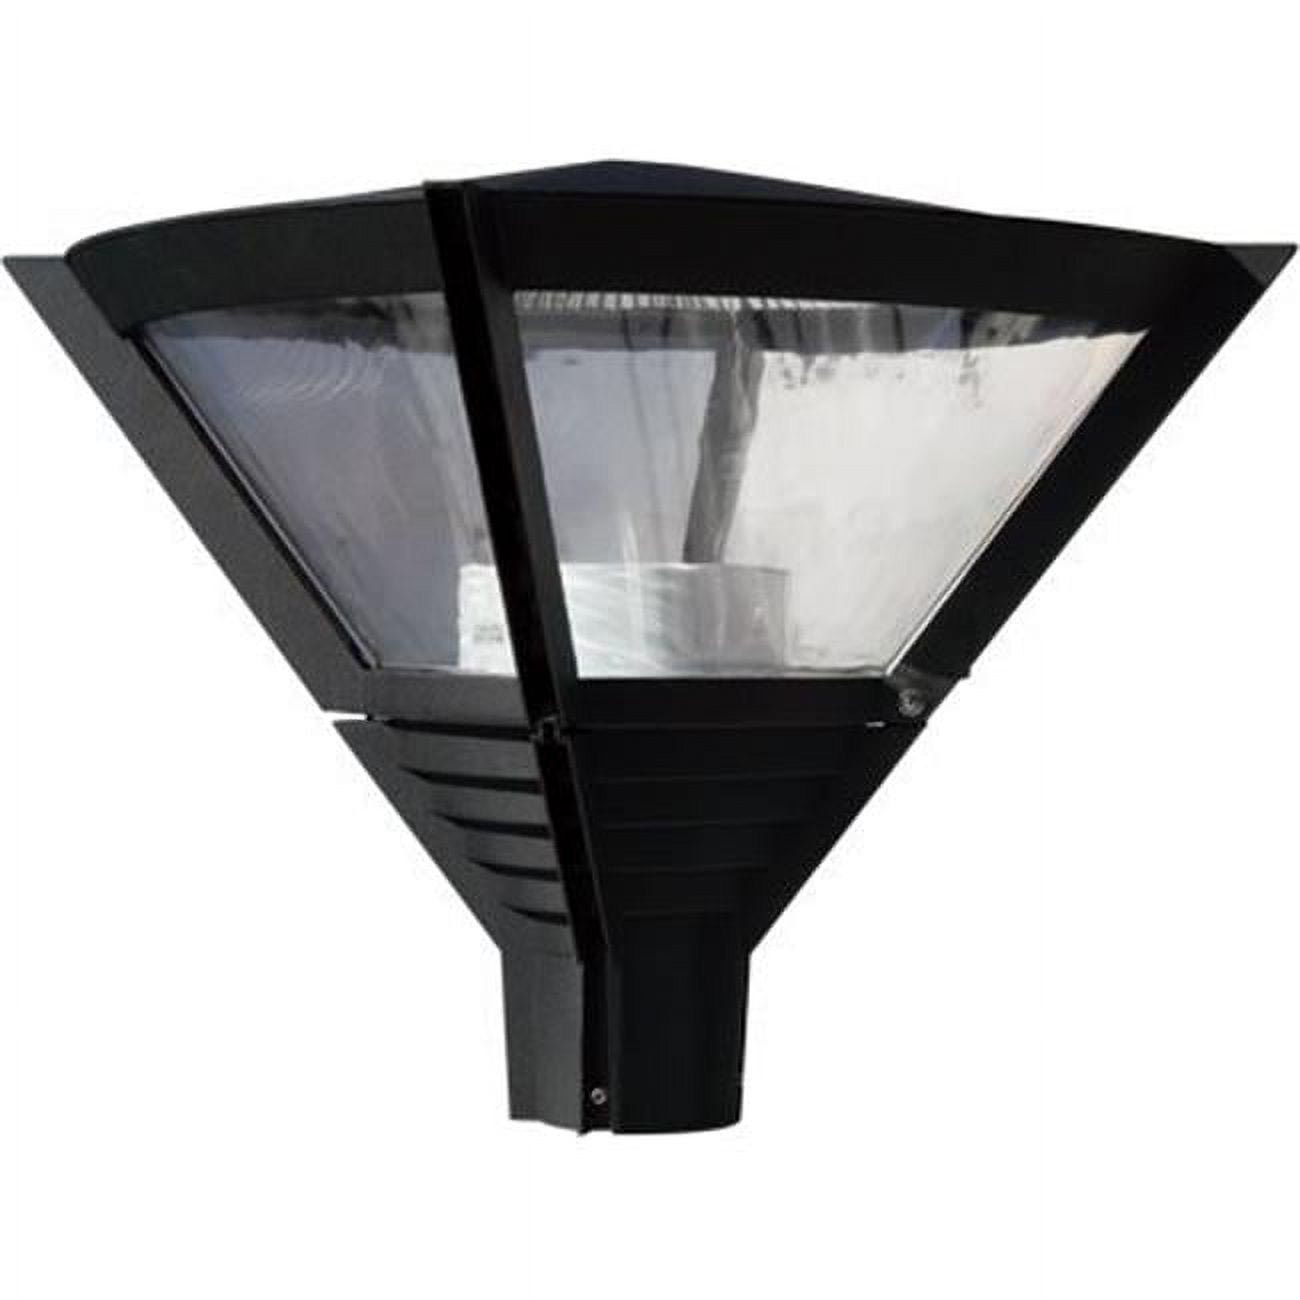 Picture of Dabmar Lighting GM560-B Powder Coated Cast Aluminum Architectural Post Top Light Fixture, Black - 20.75 x 20.75 x 20.75 in.